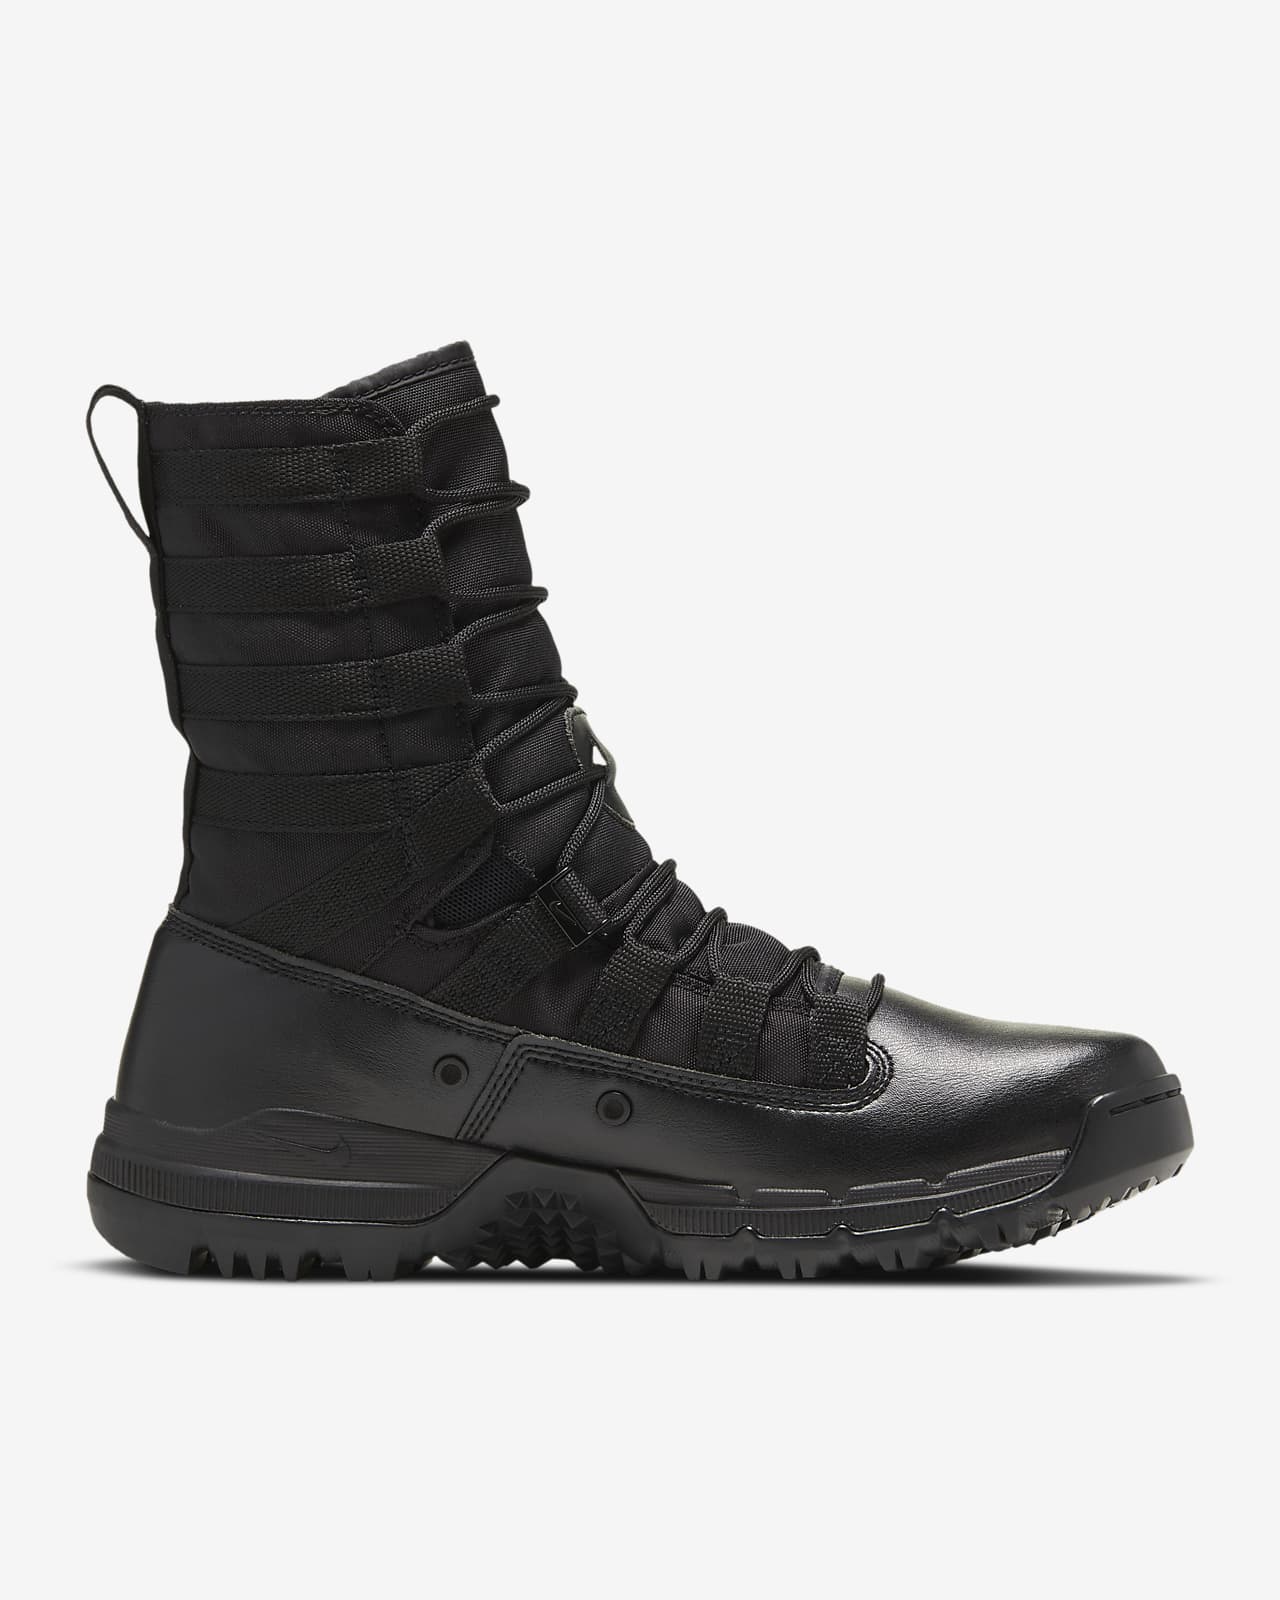 nike boot style shoes